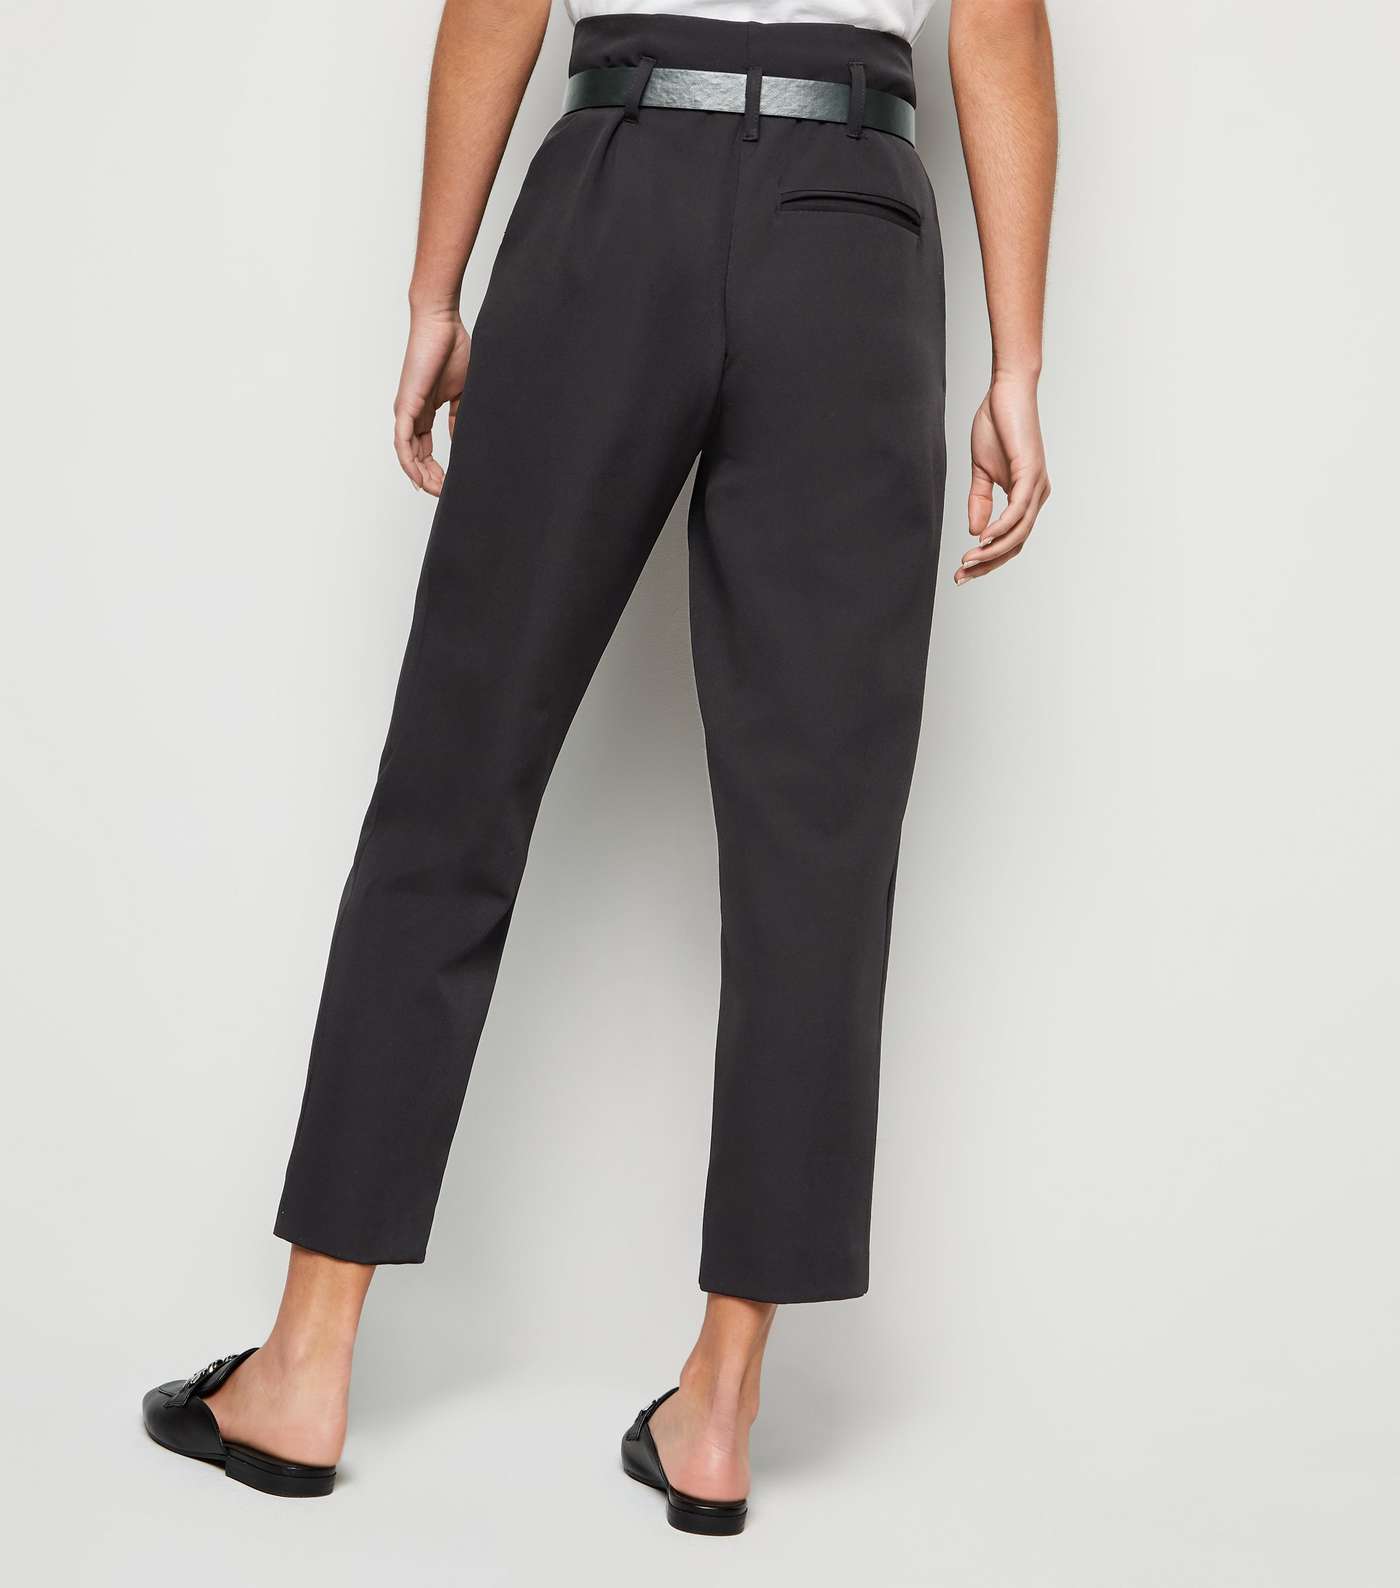 Black Belted High Waist Trousers Image 3